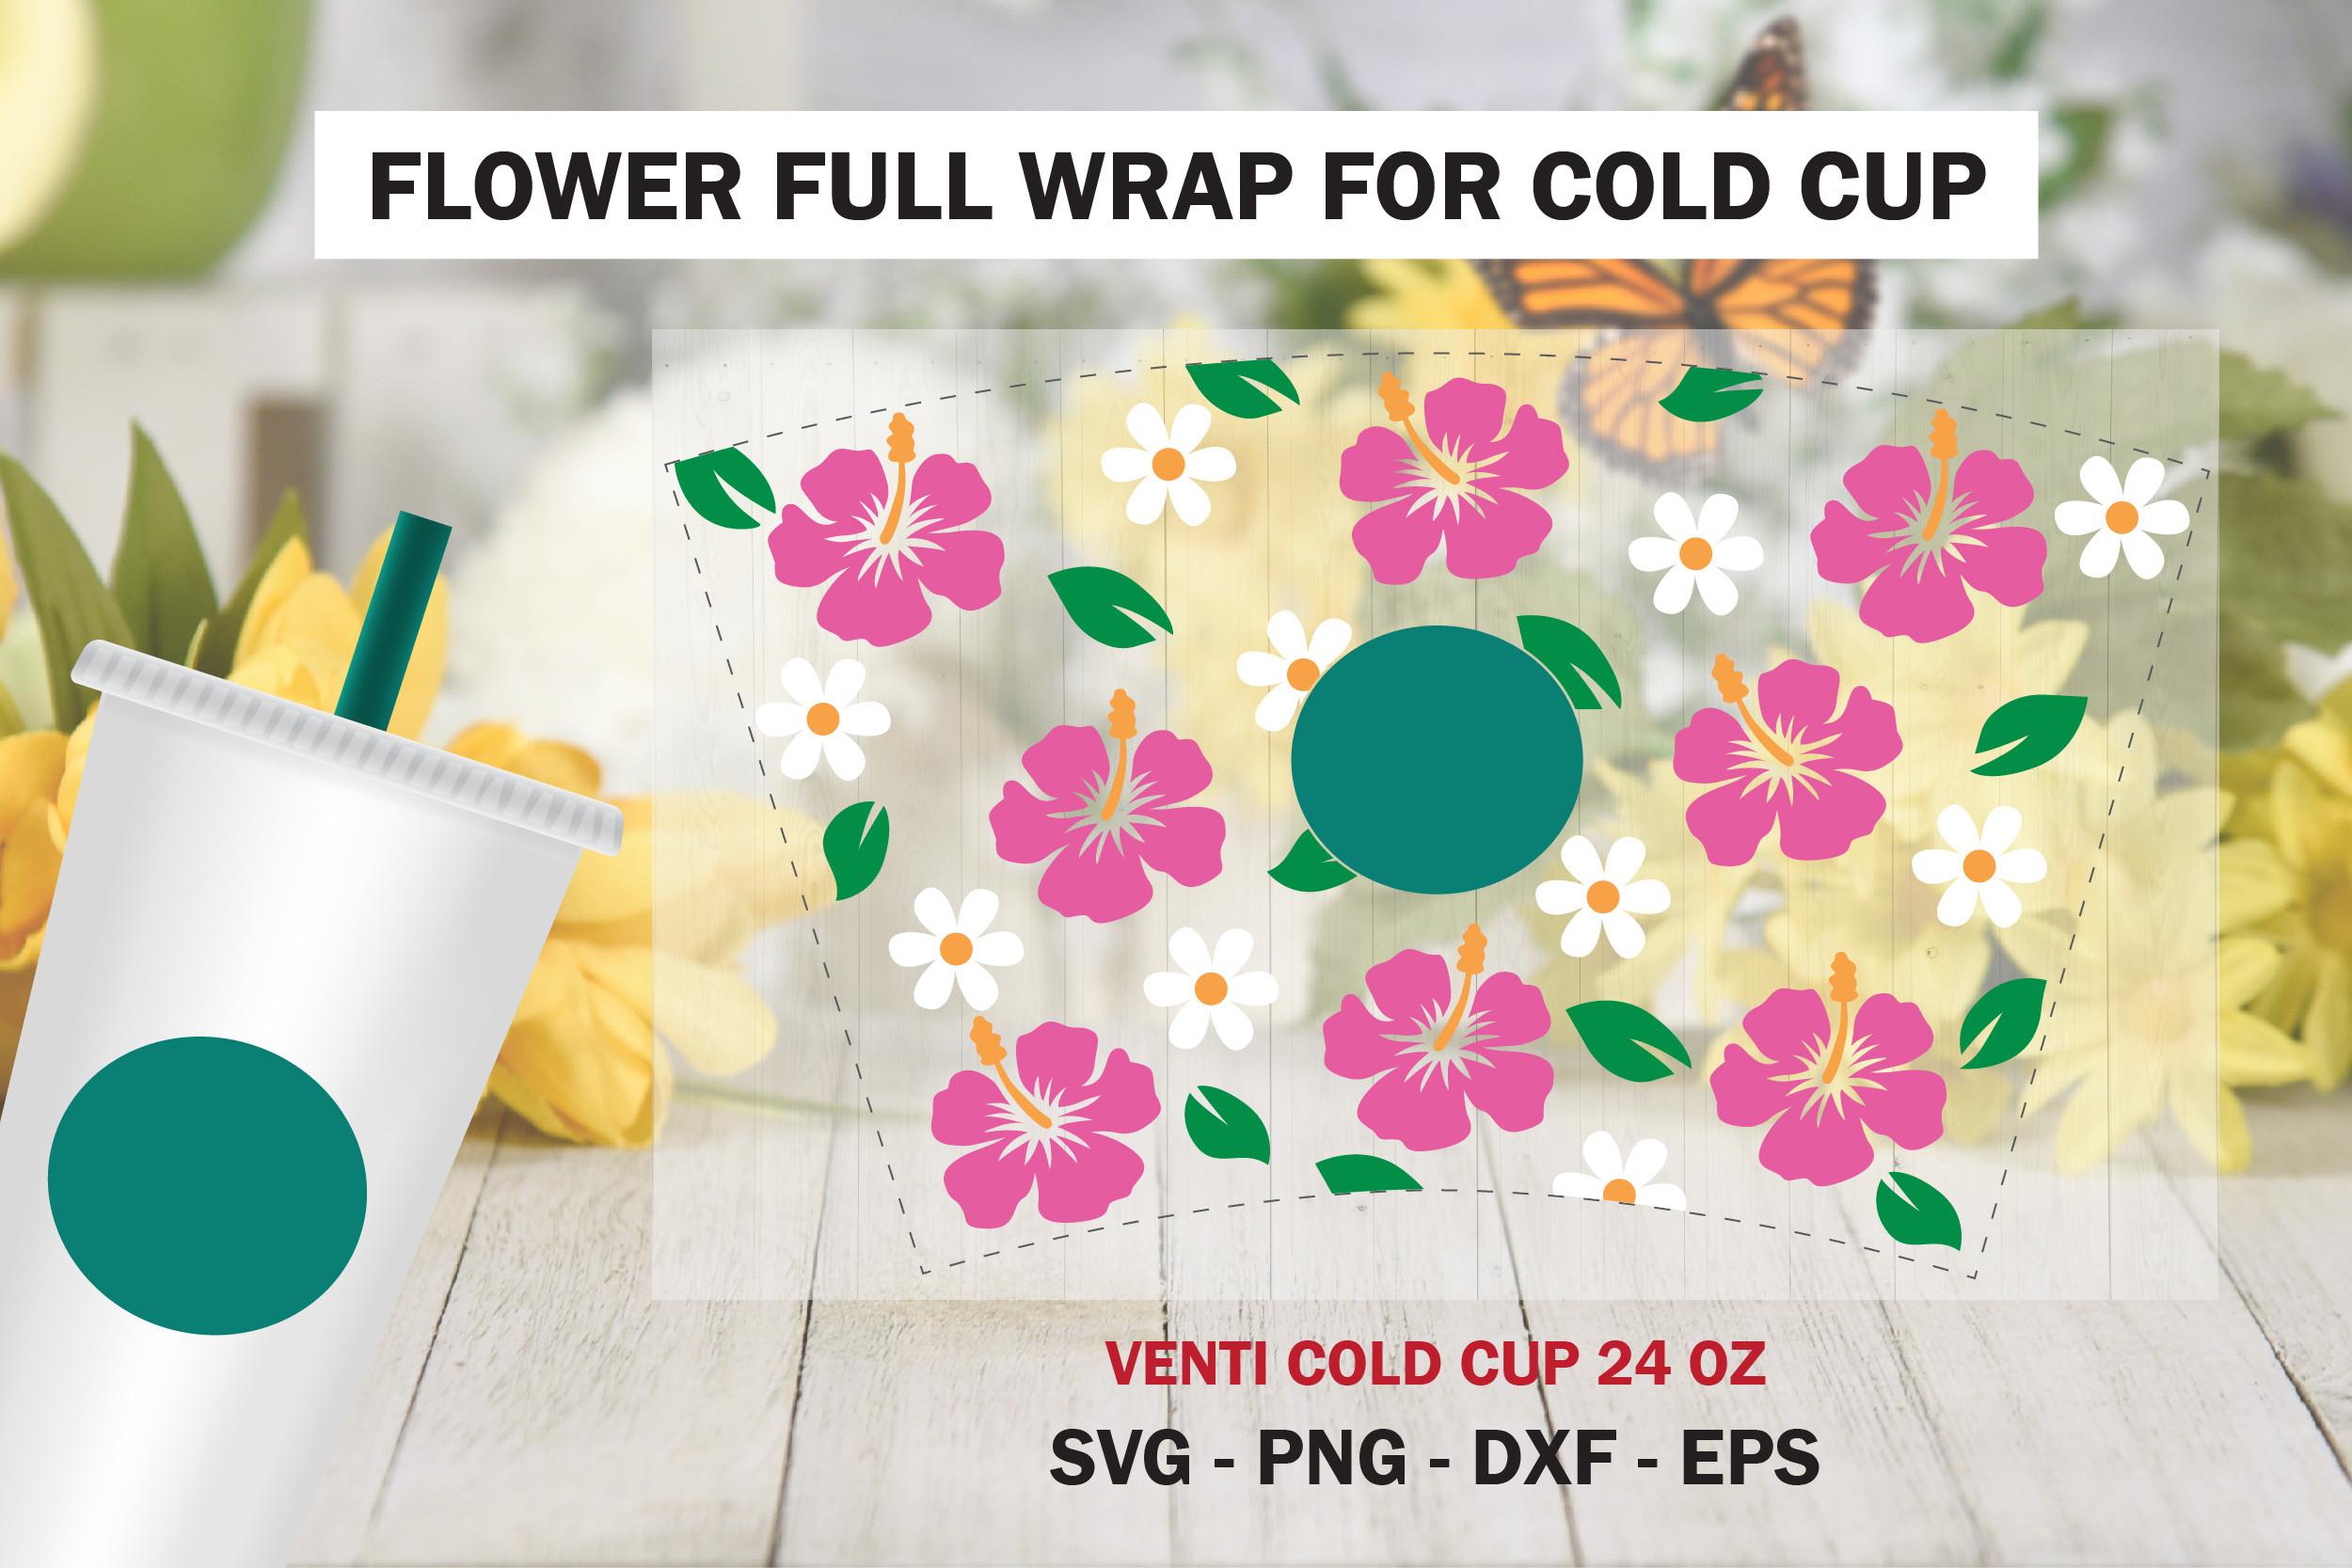 Flower Full Wrap Venti Cold Cup 24 Oz